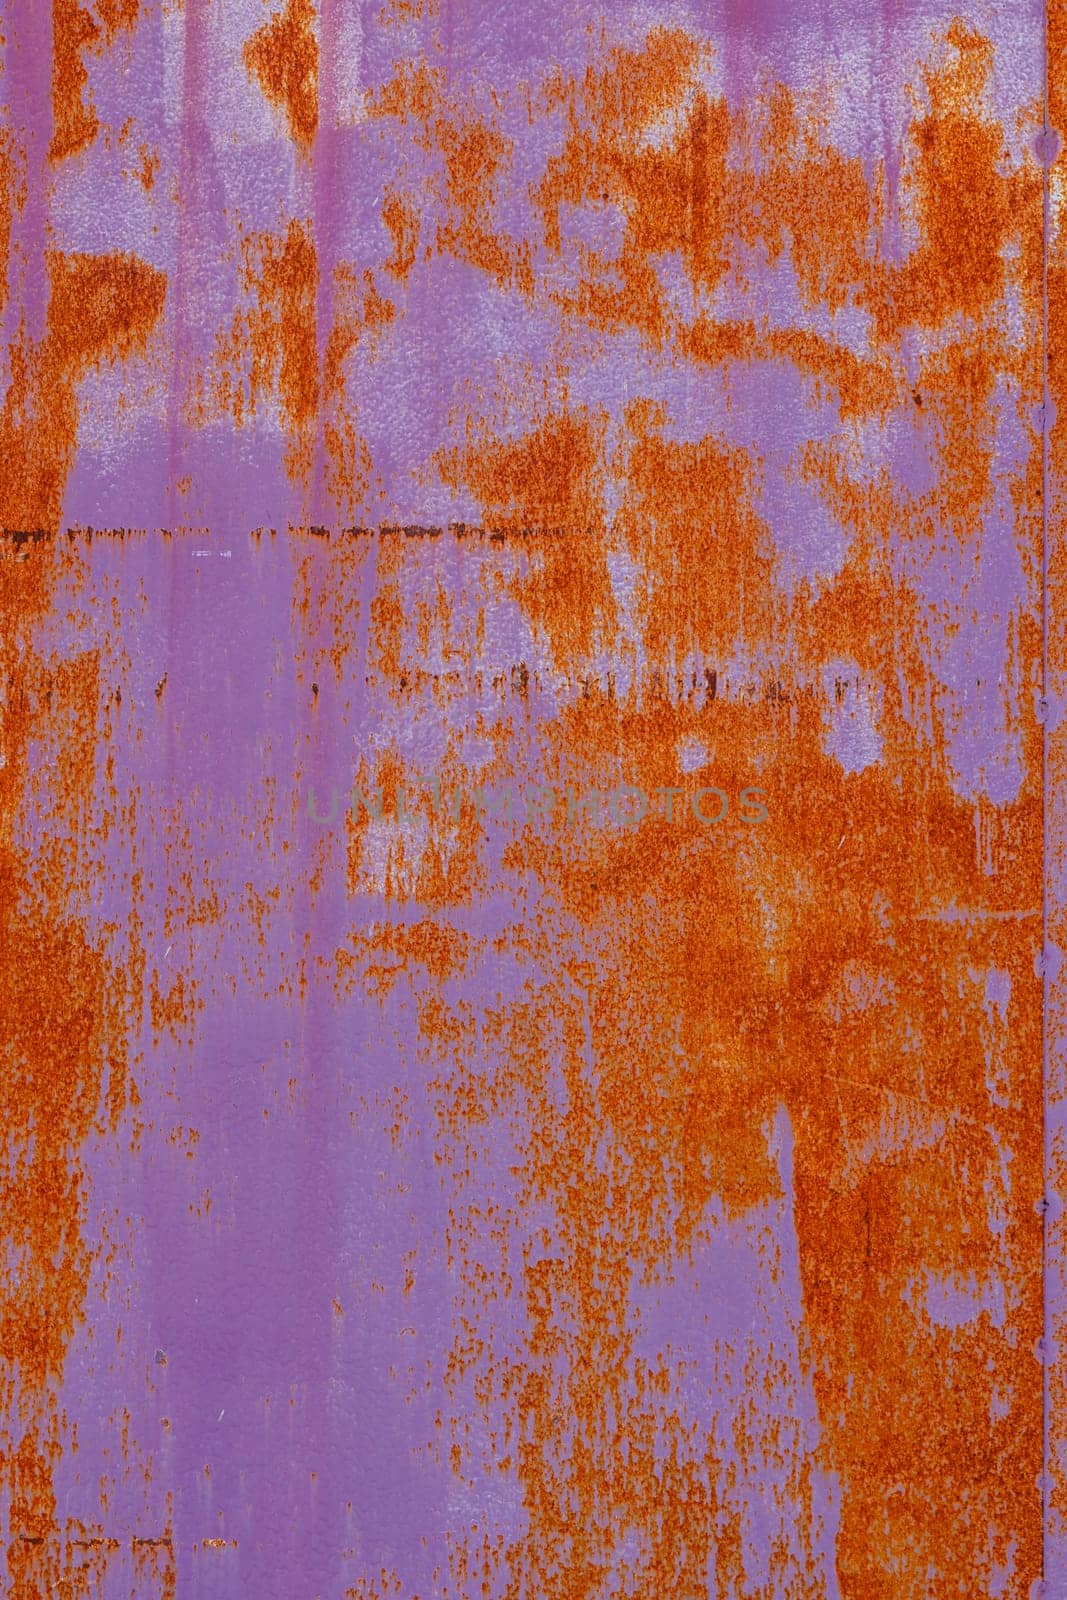 rusty flat sheet metal surface full-frame background and texture with leftovers of pink paint by z1b